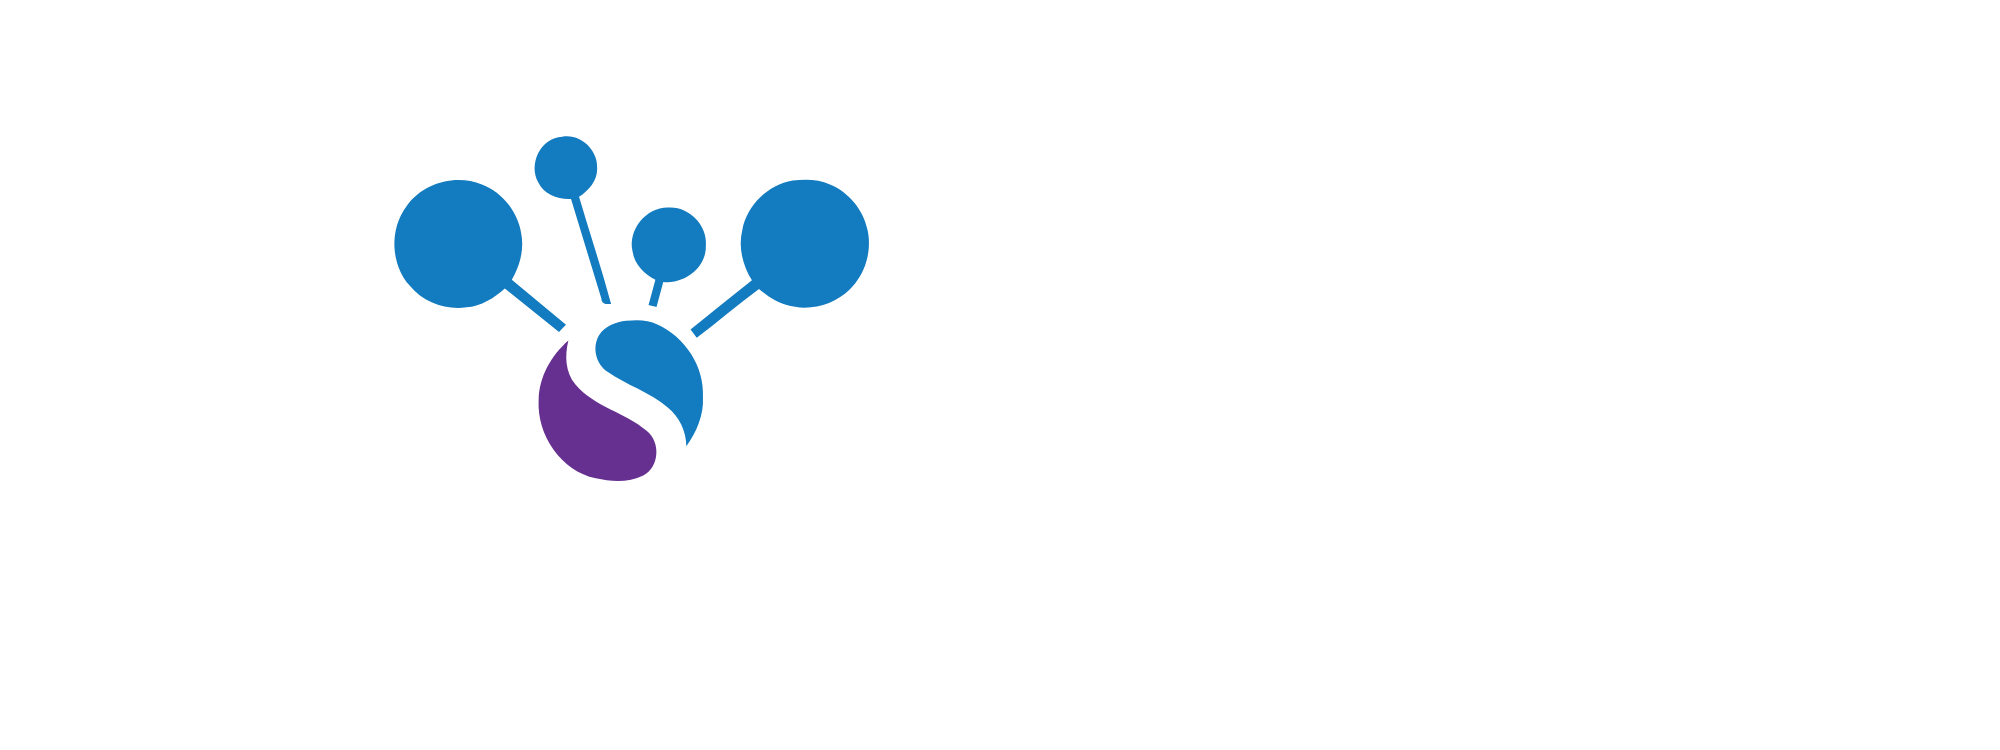 Synergy Systems Consultancy